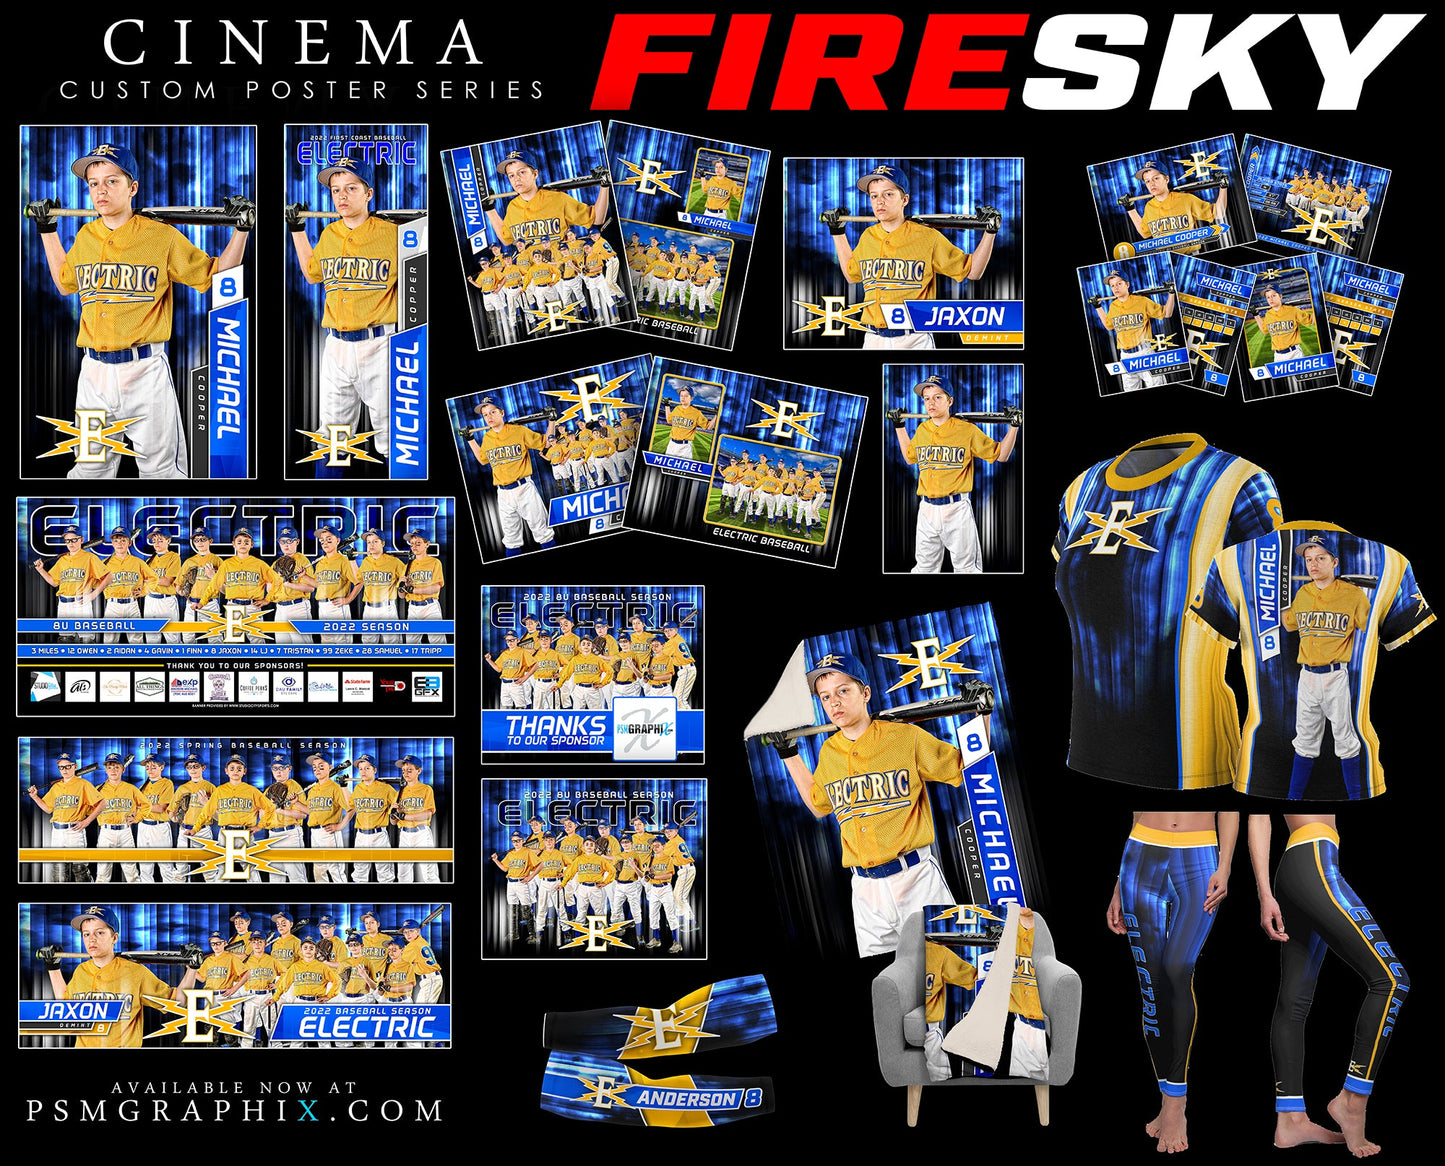 Fire Sky - Cinema Series - Full Collection-Photoshop Template - PSMGraphix